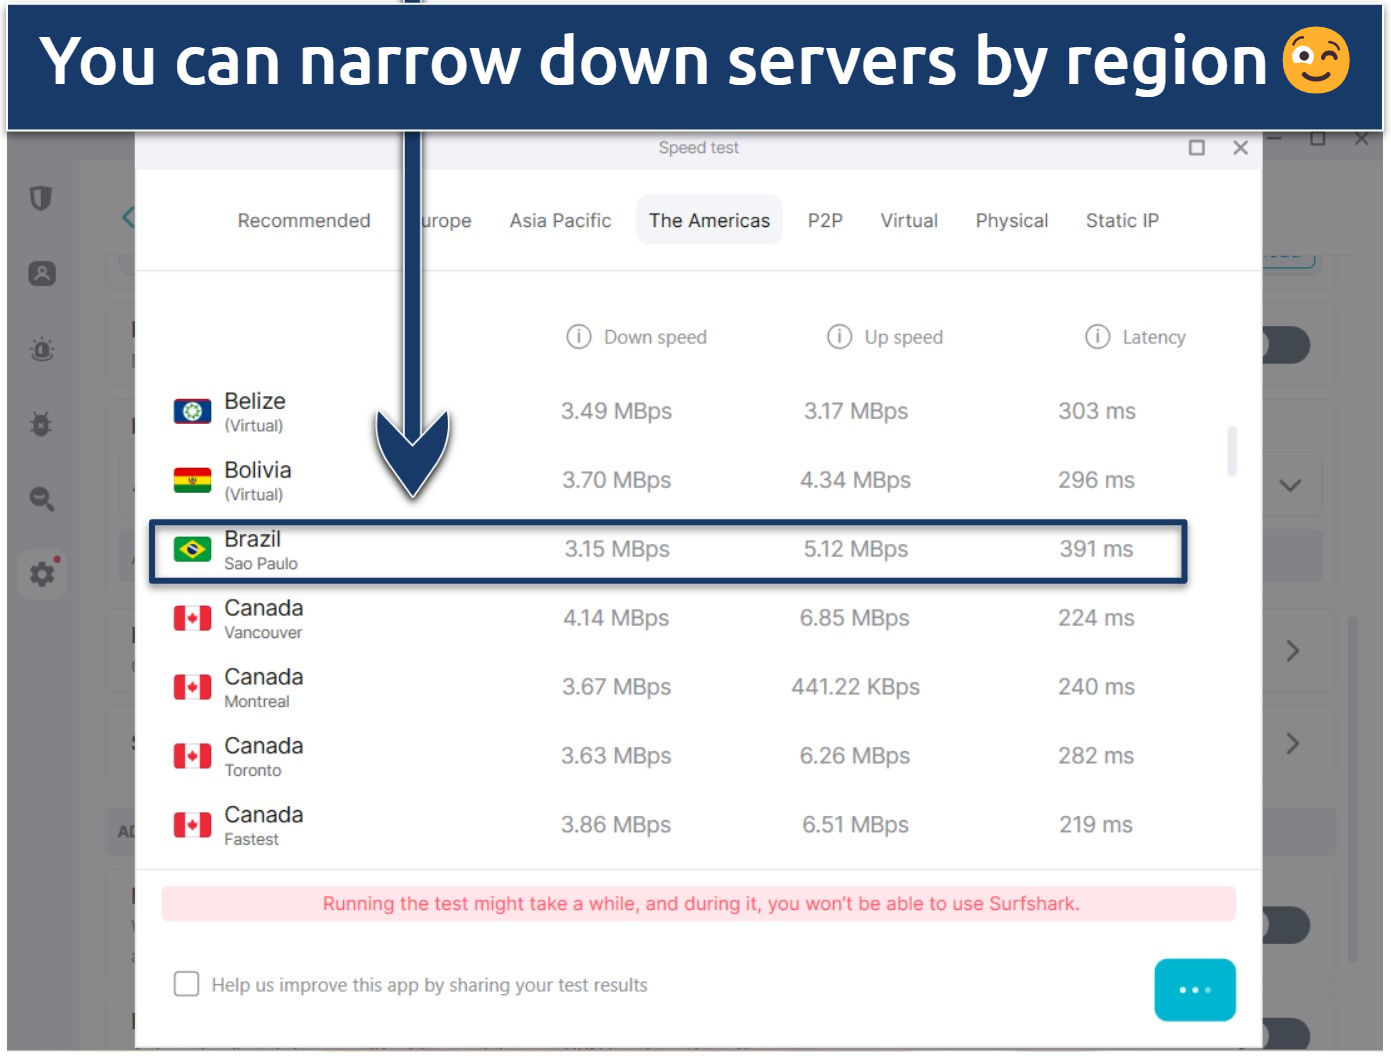 A screenshot of the speed test results for Surfshark's servers in the Americas.